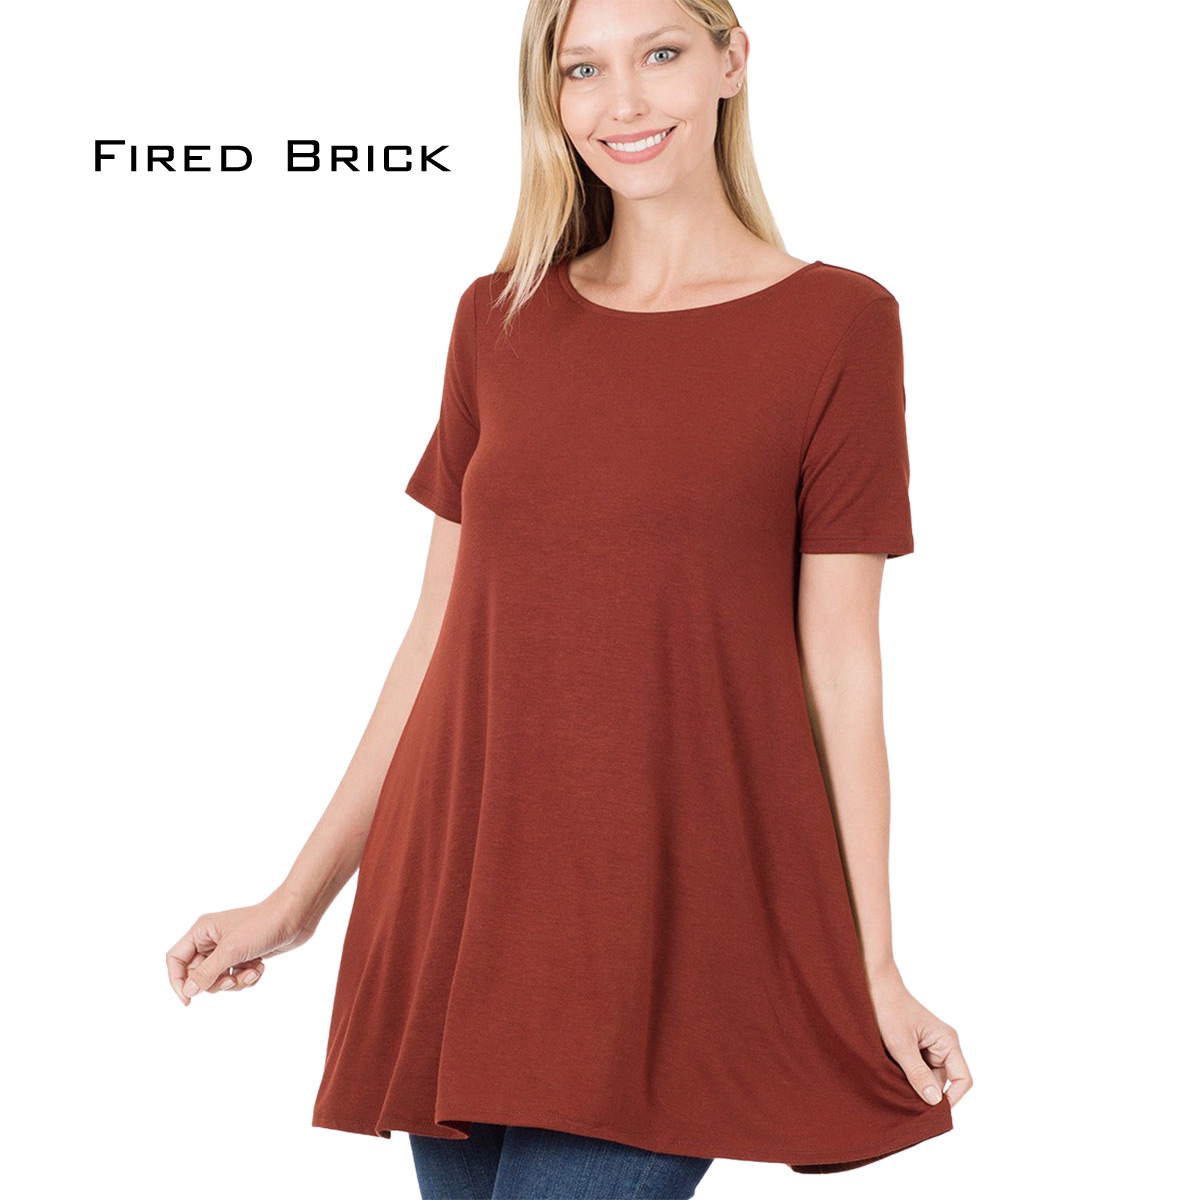 FIRED BRICK Short Sleeve Flaired Top w/ Pockets 1631